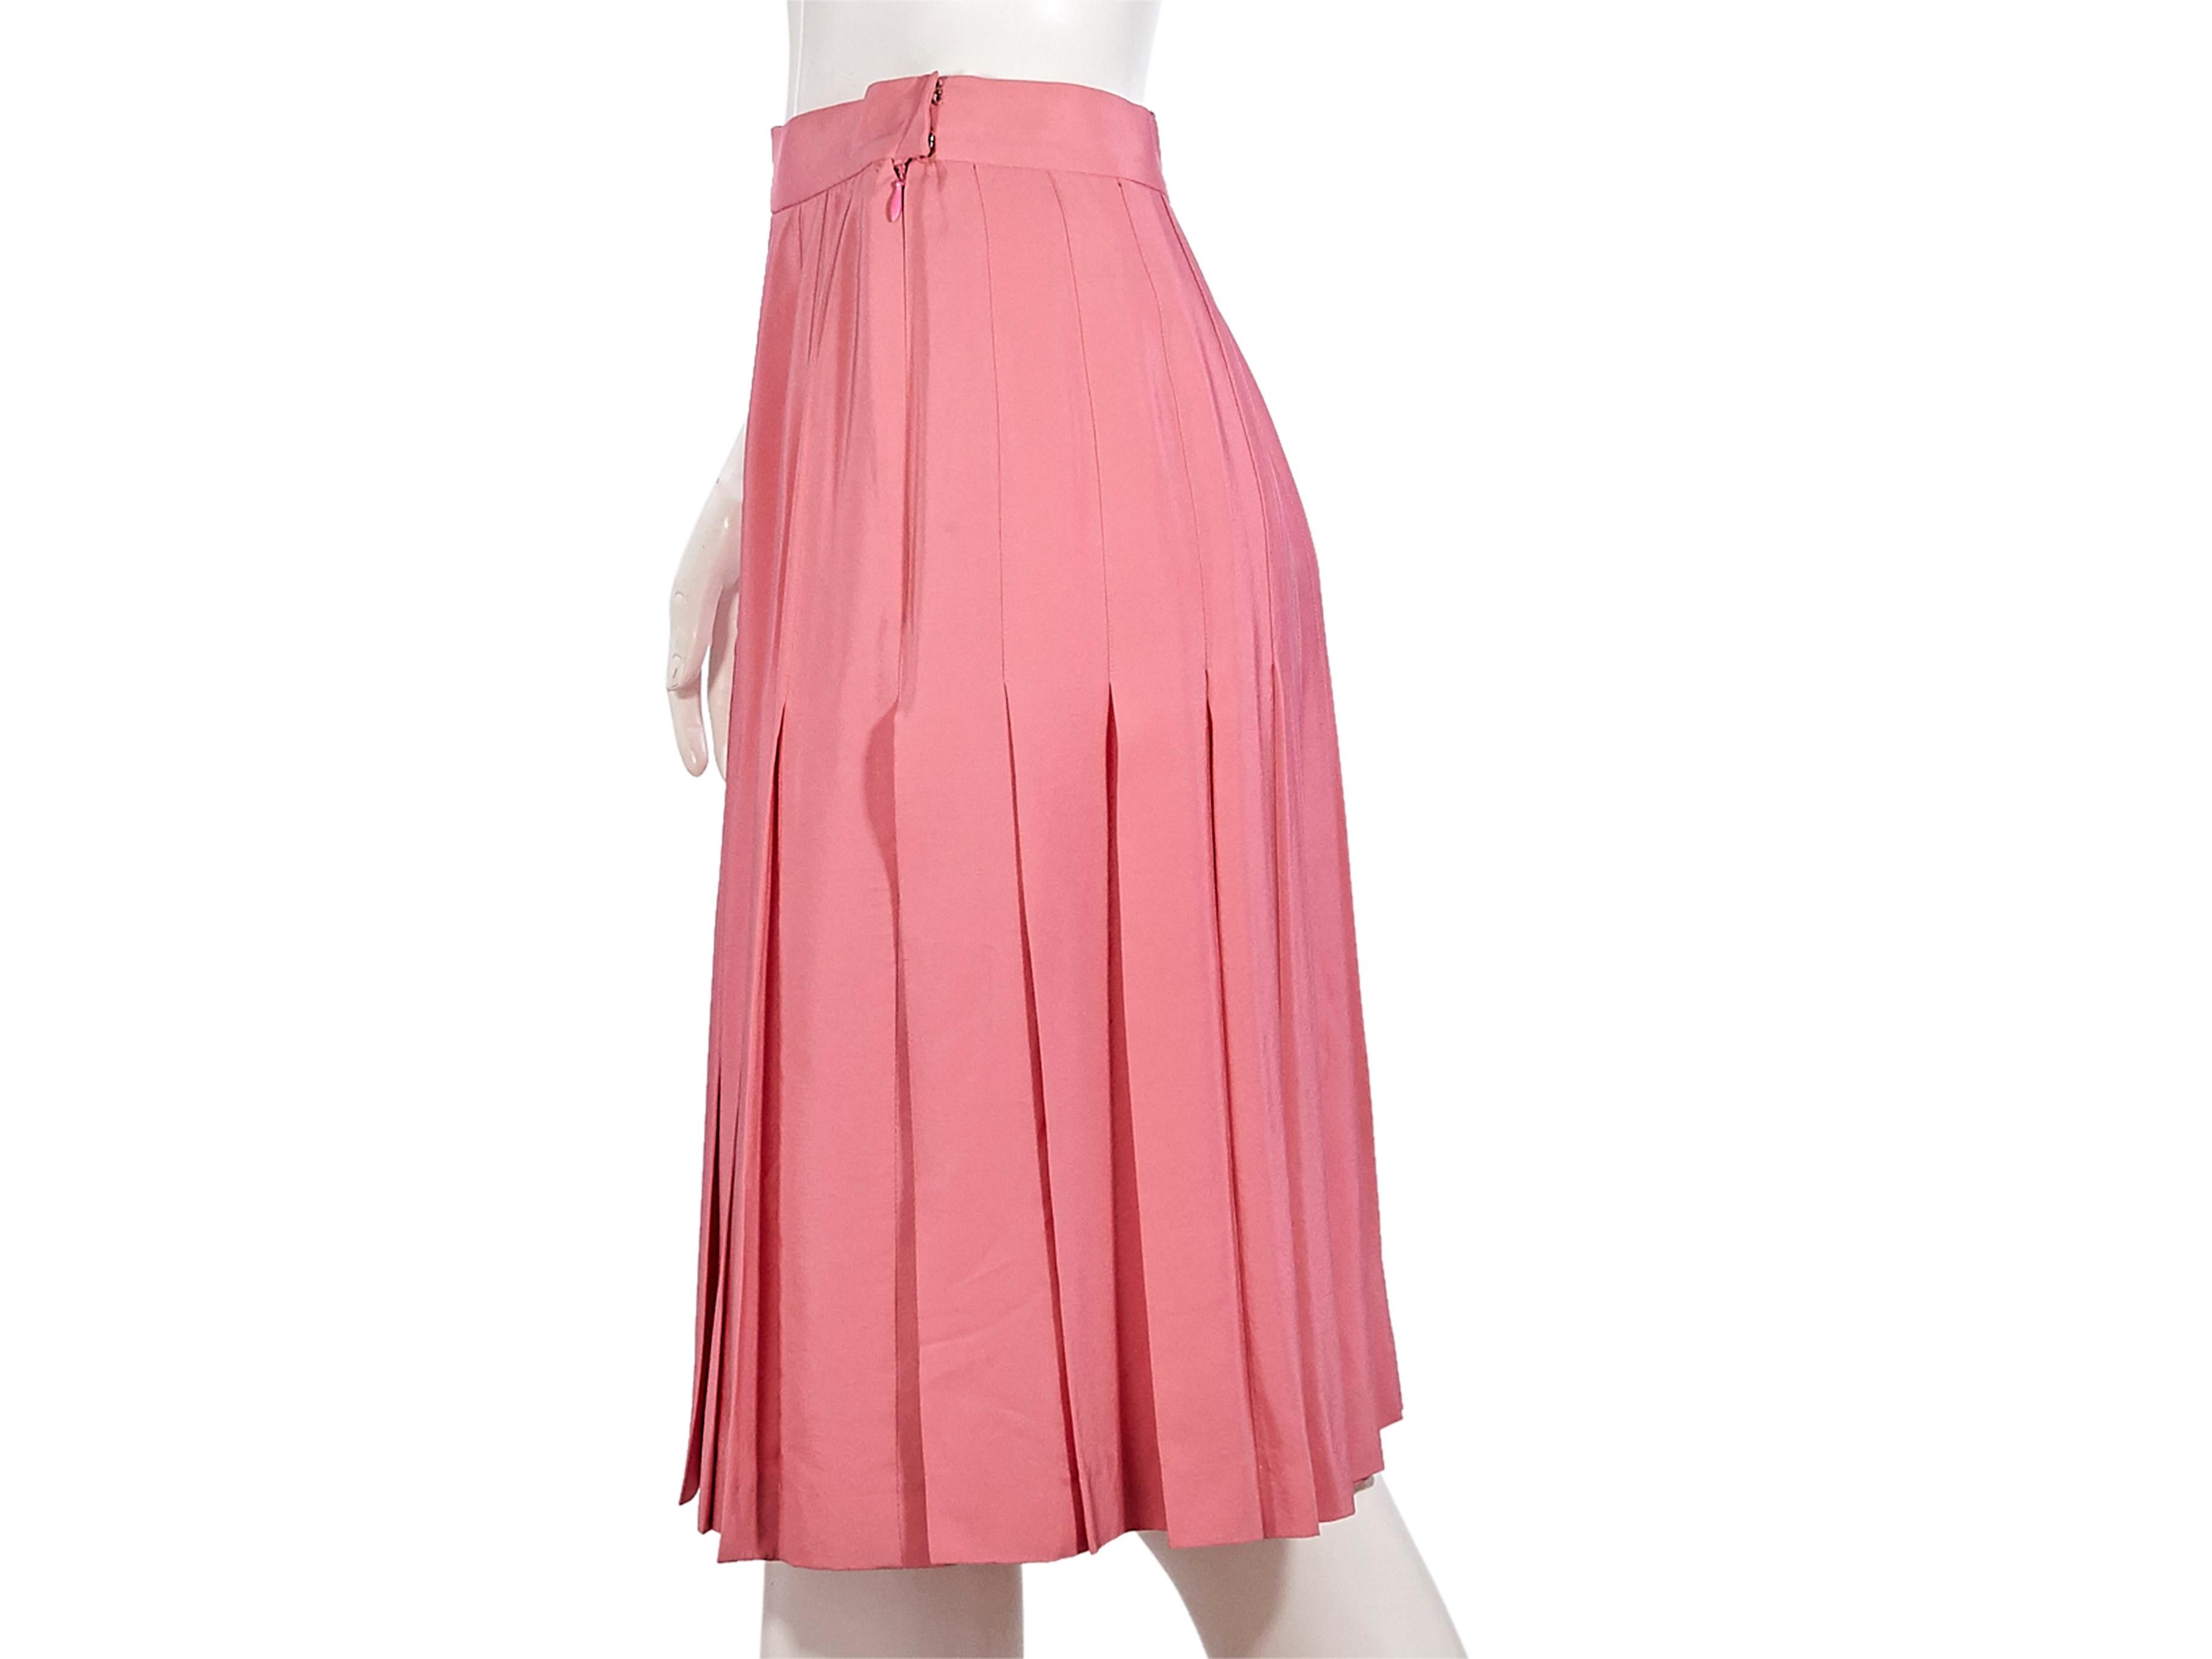 Product details:  Pink silk pleated knee-length skirt by Chanel Boutique. High-waist. Concealed snap button and zip side closure. 27